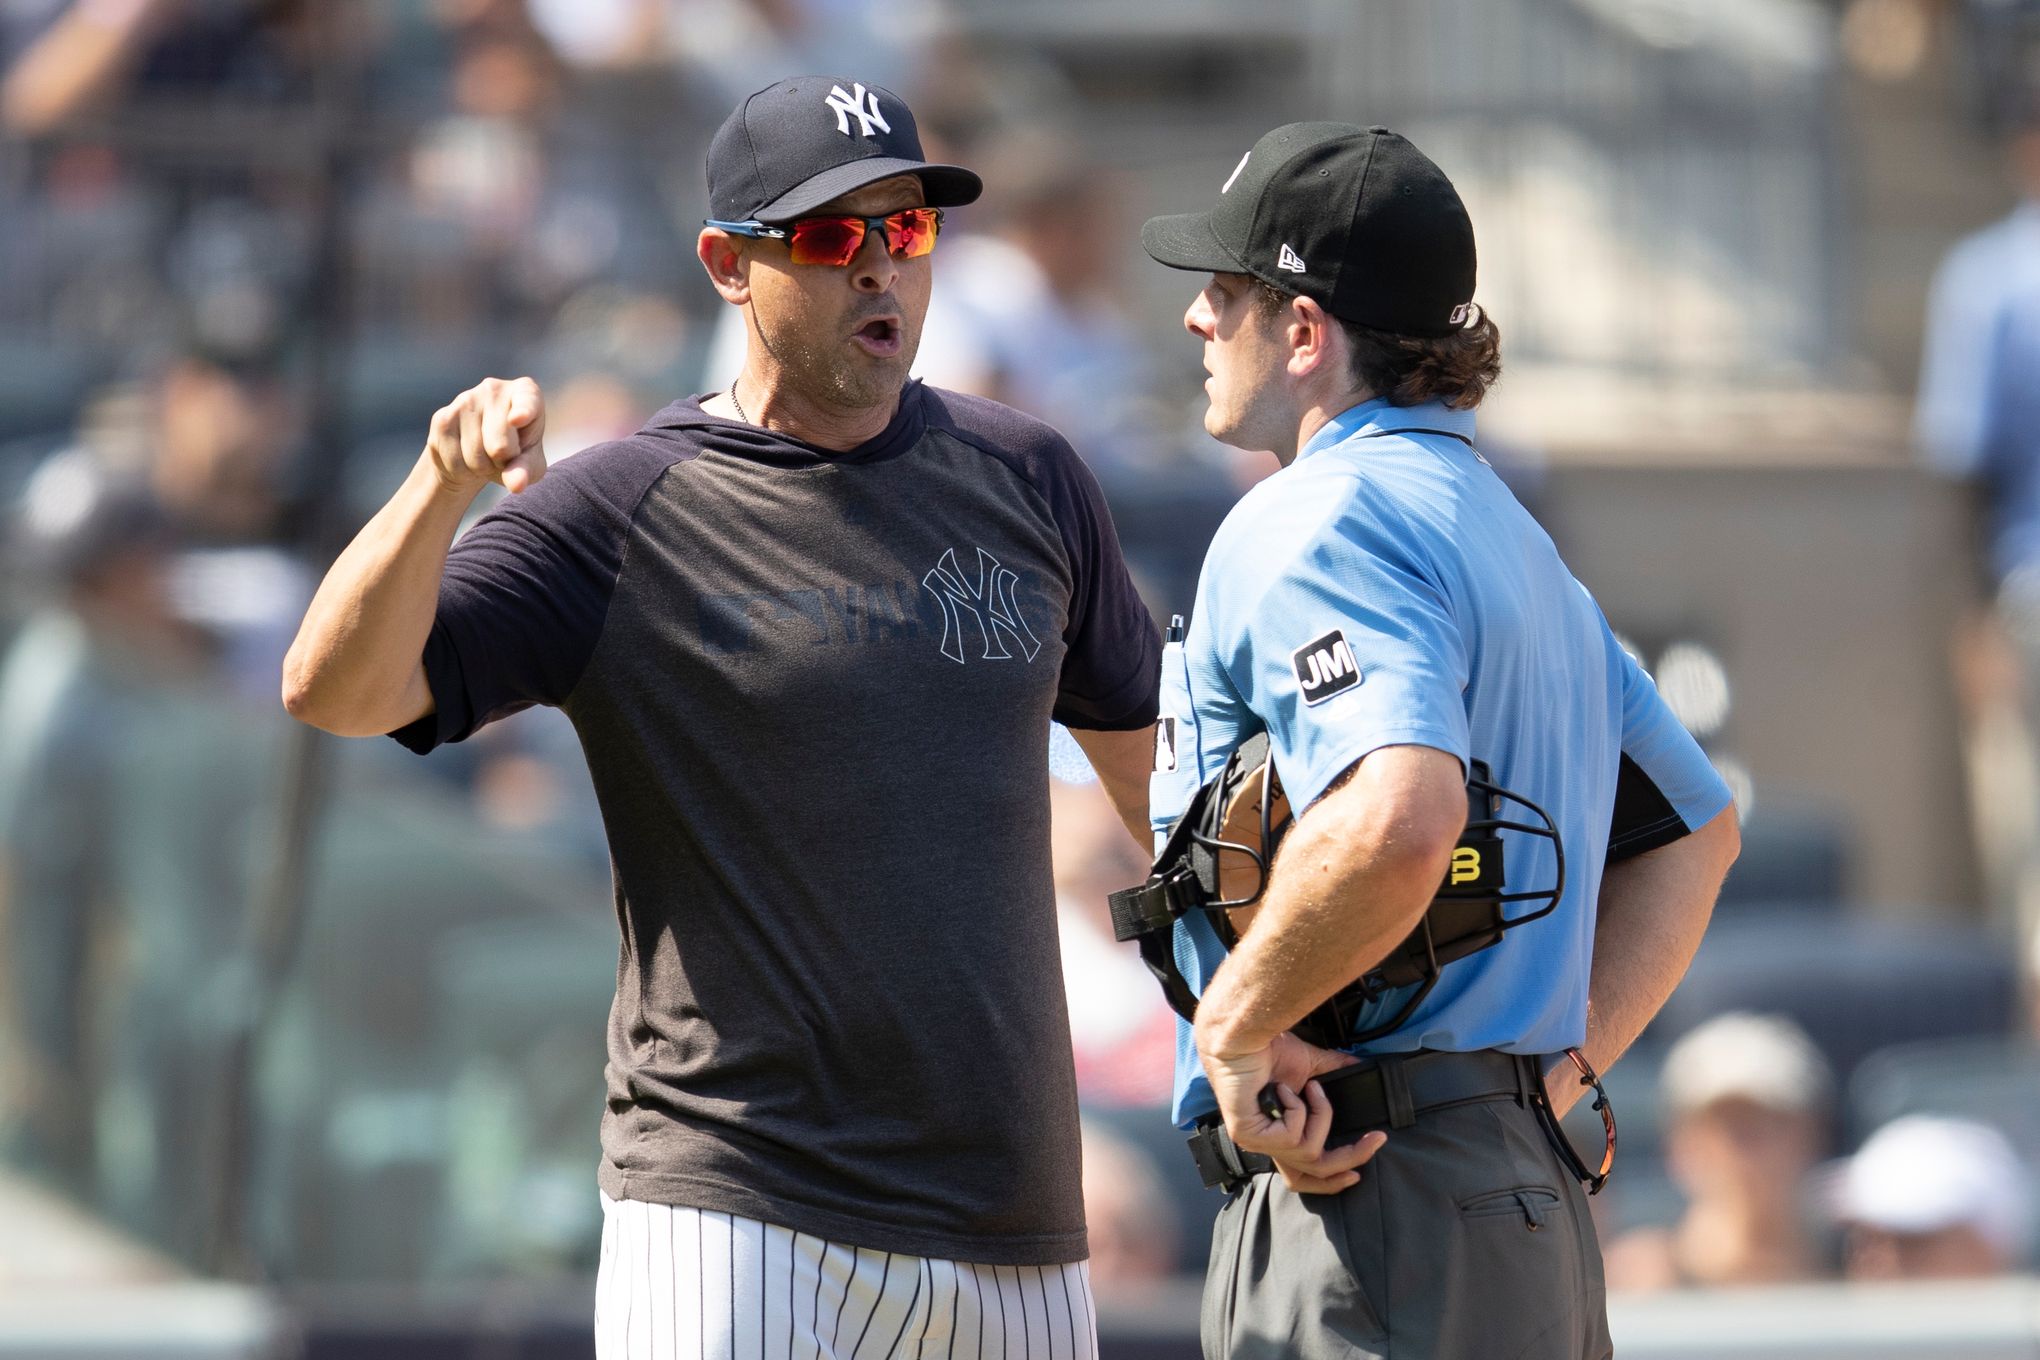 Yankees' Aaron Boone to umpire during tirade: My guys are savages